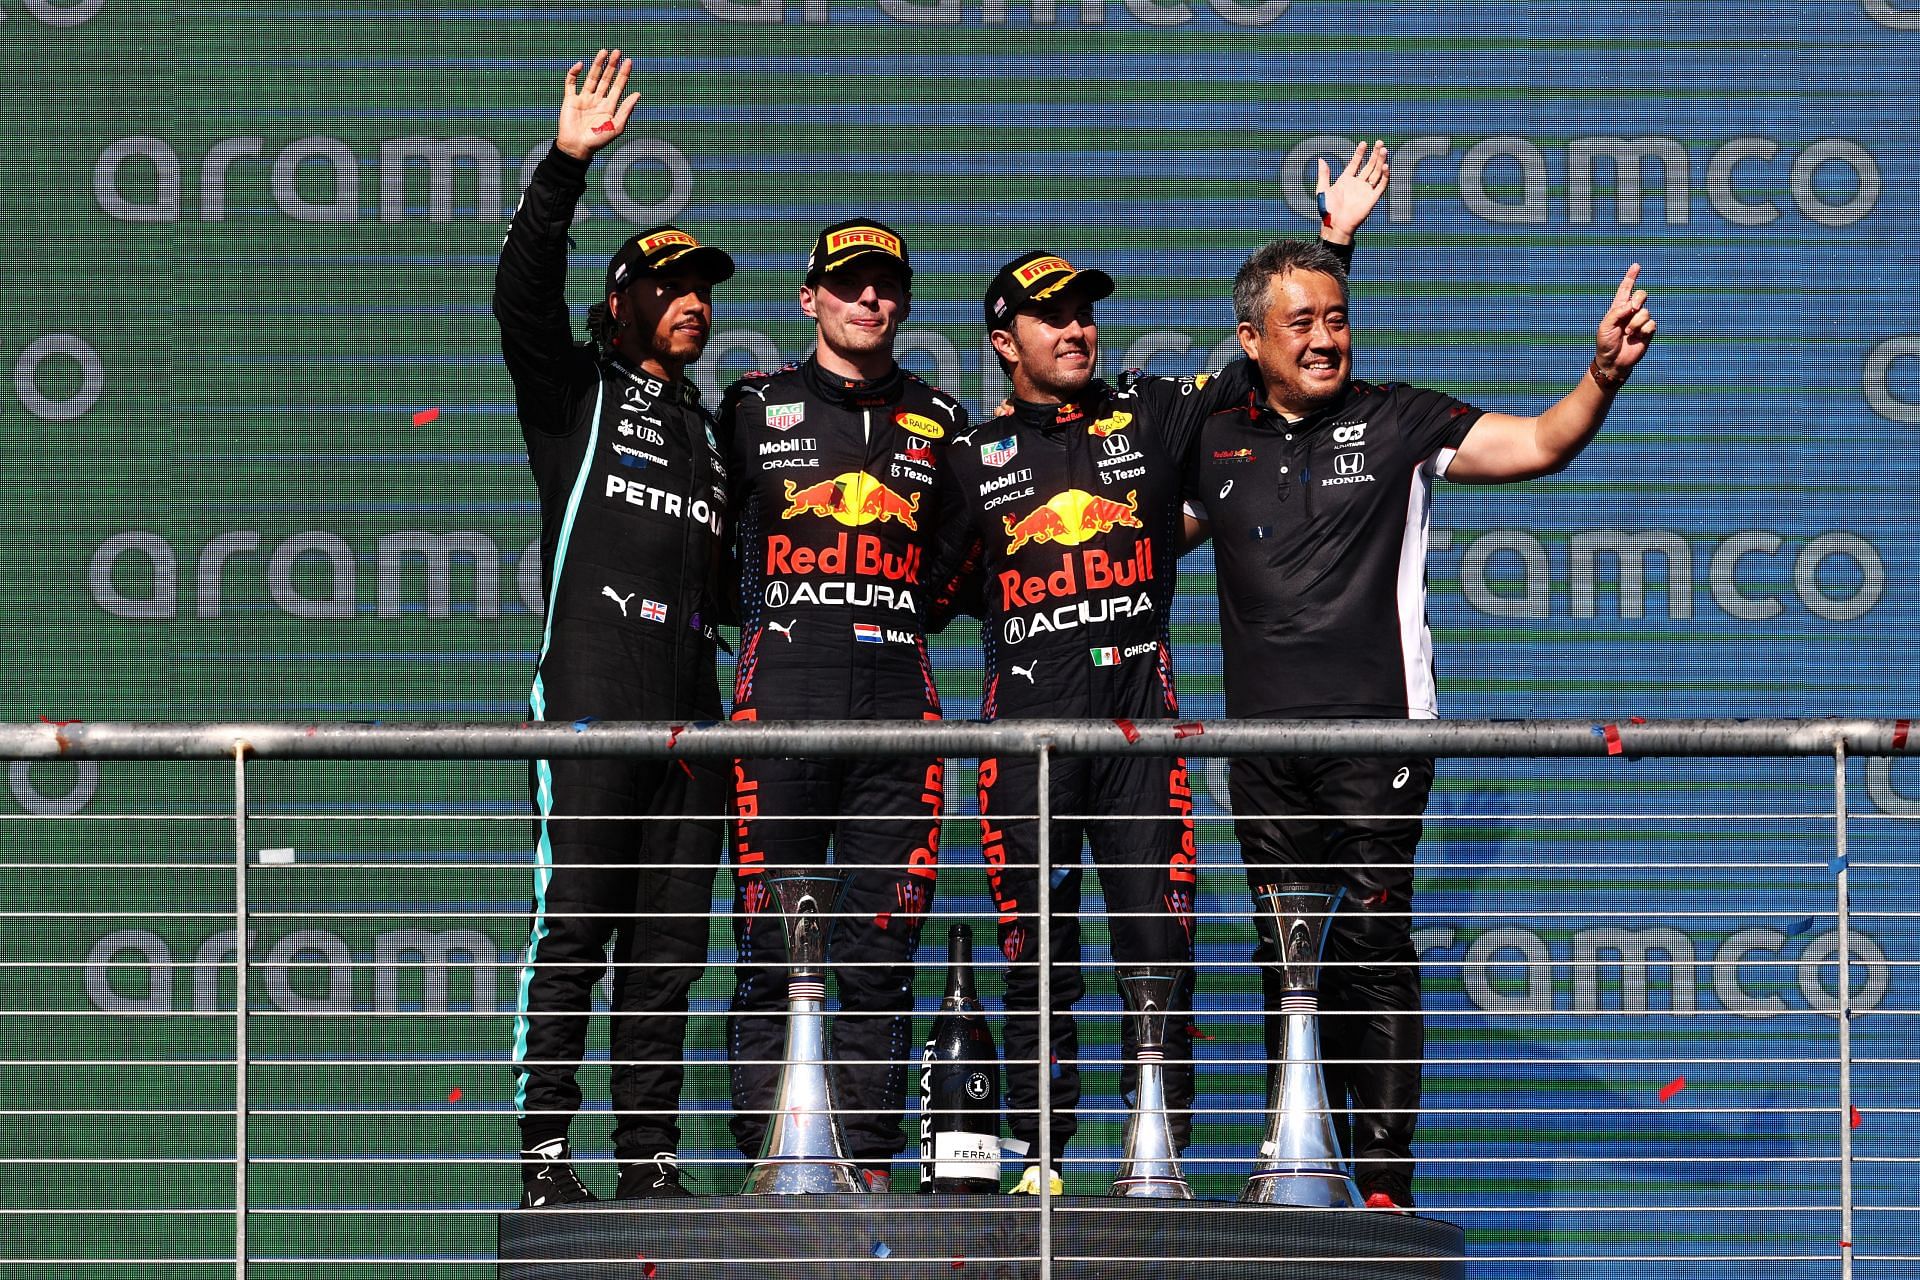 (L-R) Lewis Hamilton, Max Verstappen, Sergio Perez and Masashi Yamamoto of Honda celebrate on the podium after the 2021 USGP. (Photo by Chris Graythen/Getty Images)